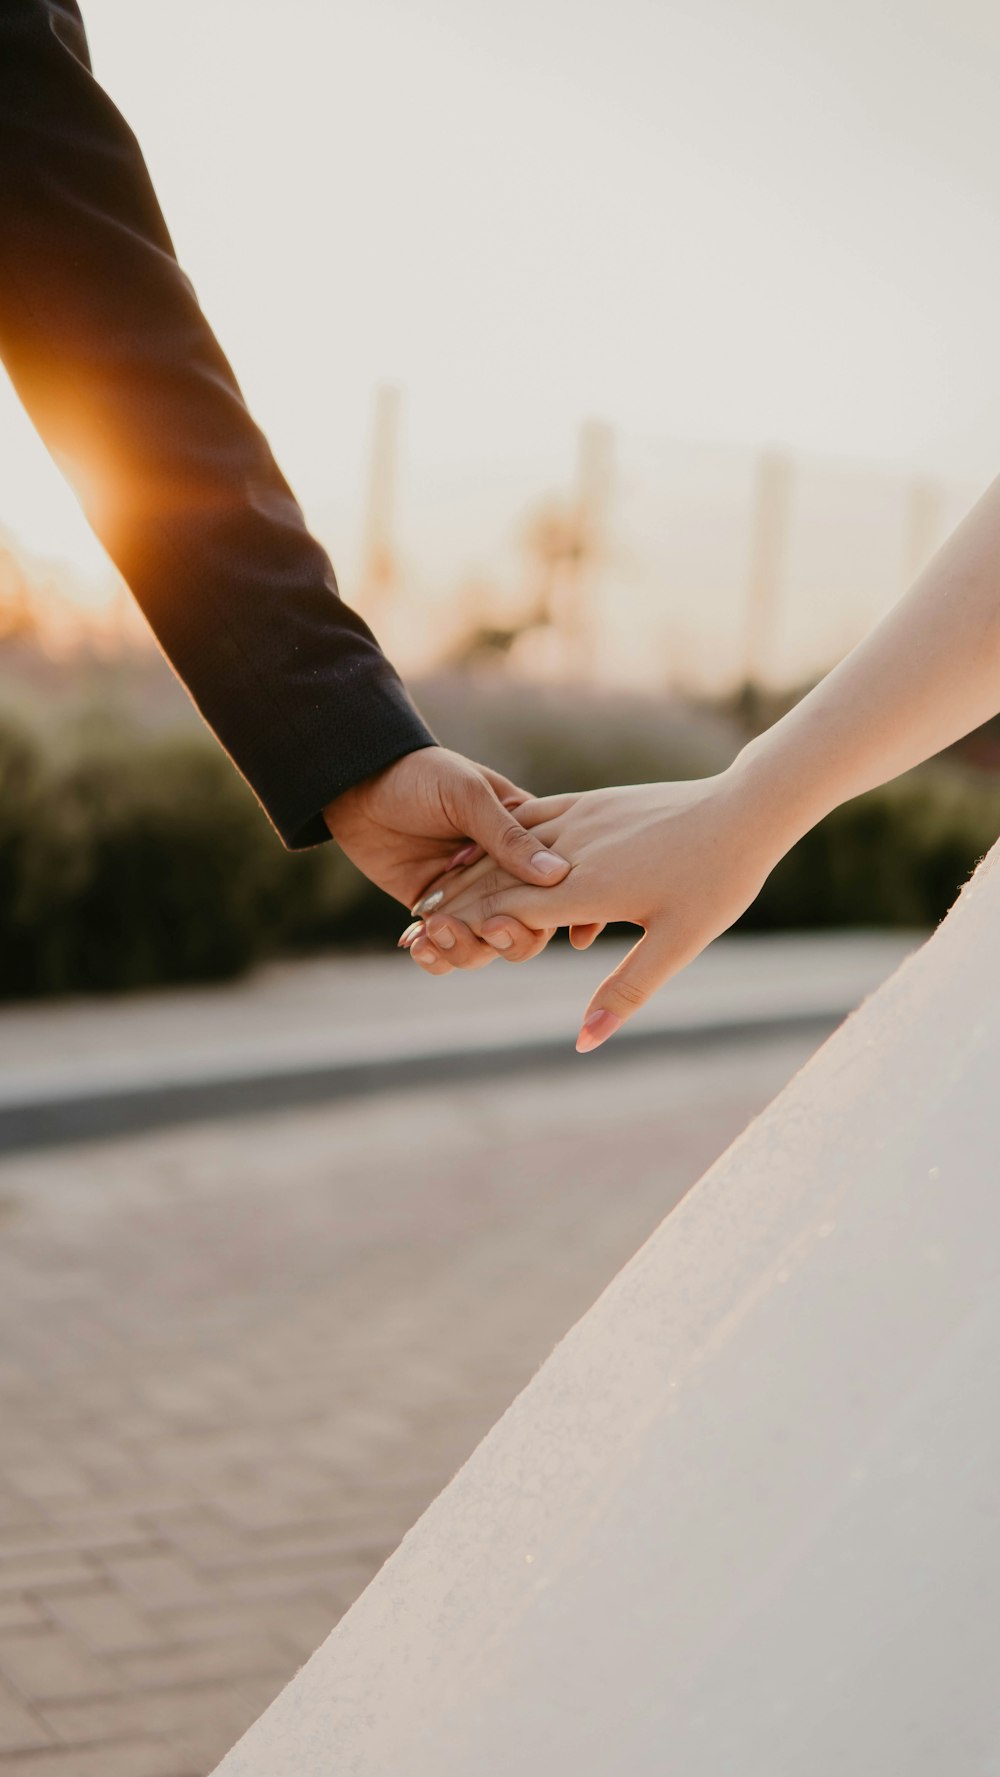 500 Holding Hands Pictures Images Hd Download Free Photos On Unsplash